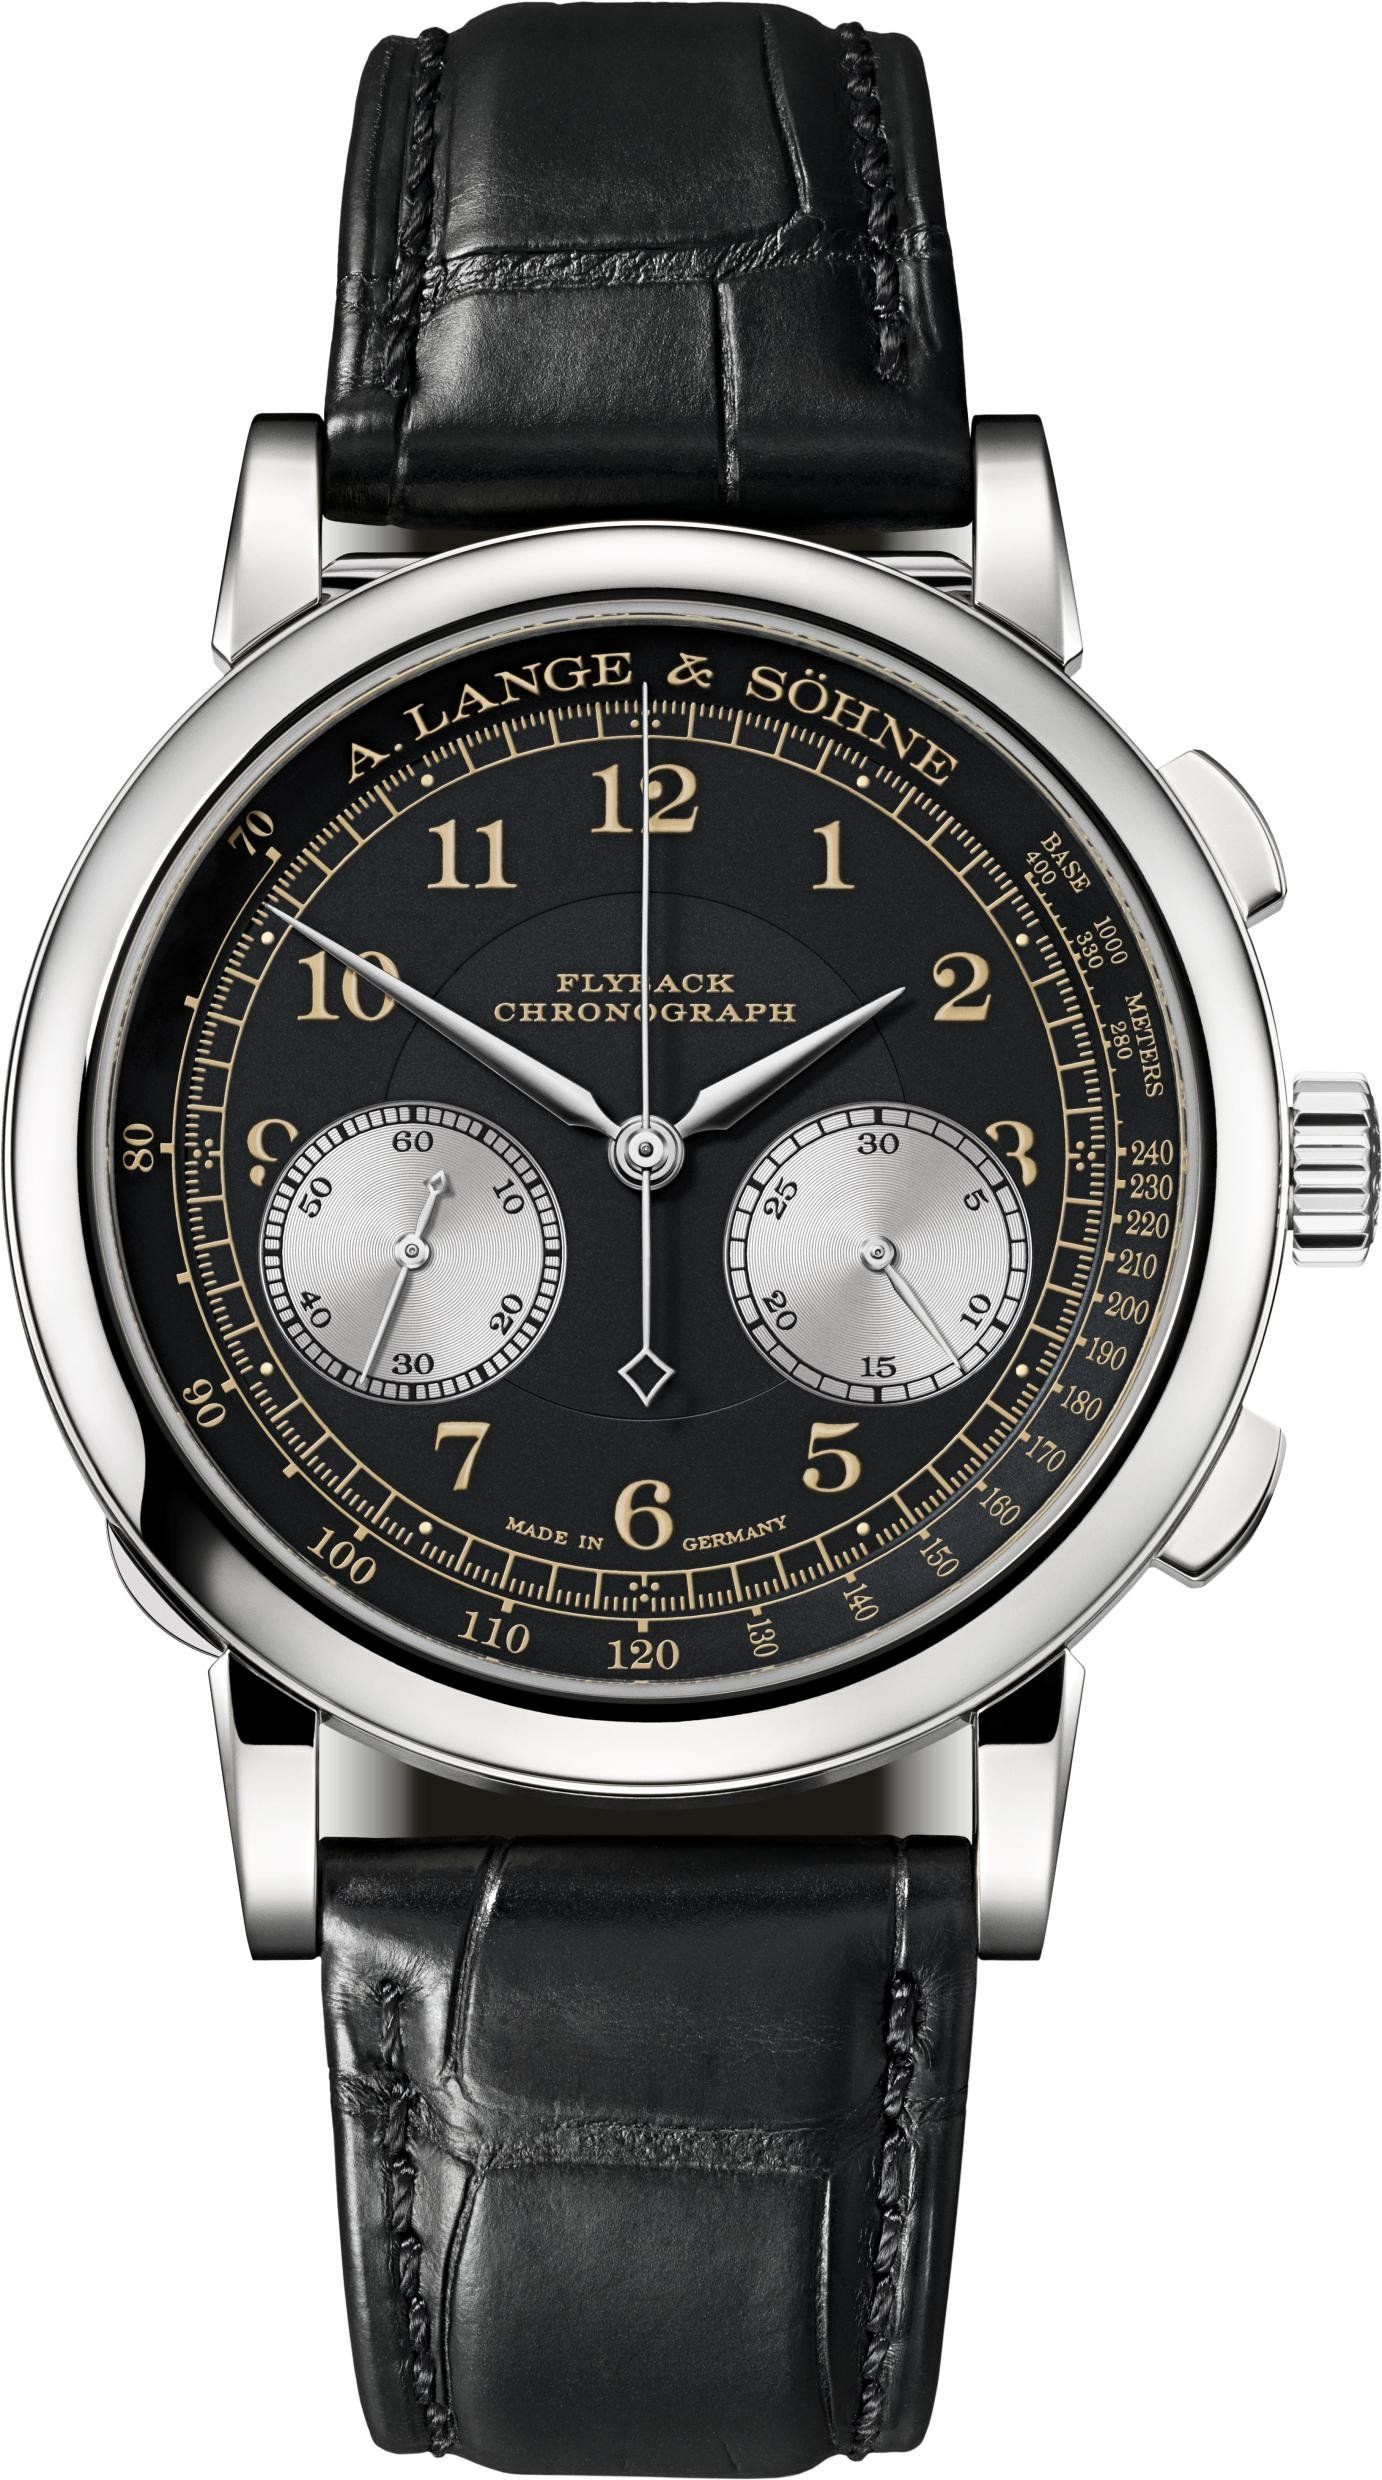 1815 CHRONOGRAPH “Hampton Court Edition”, ref. 414.047 The unique piece will be auctioned off for a good cause after the Concours of Elegance 2022